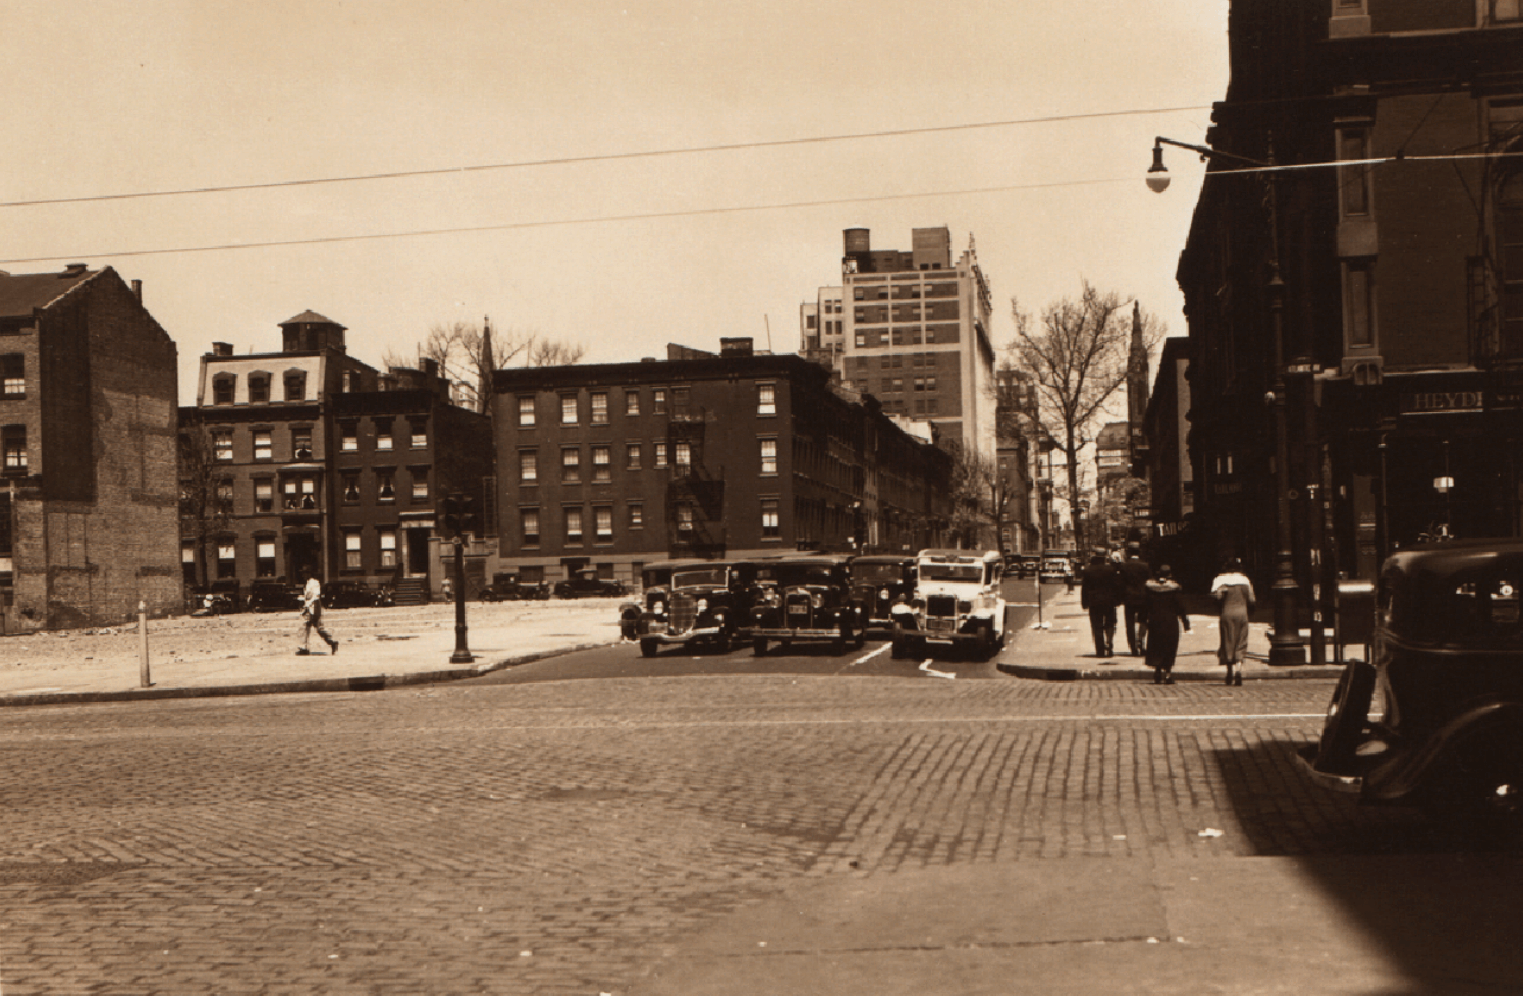 the vacant lot in 1935